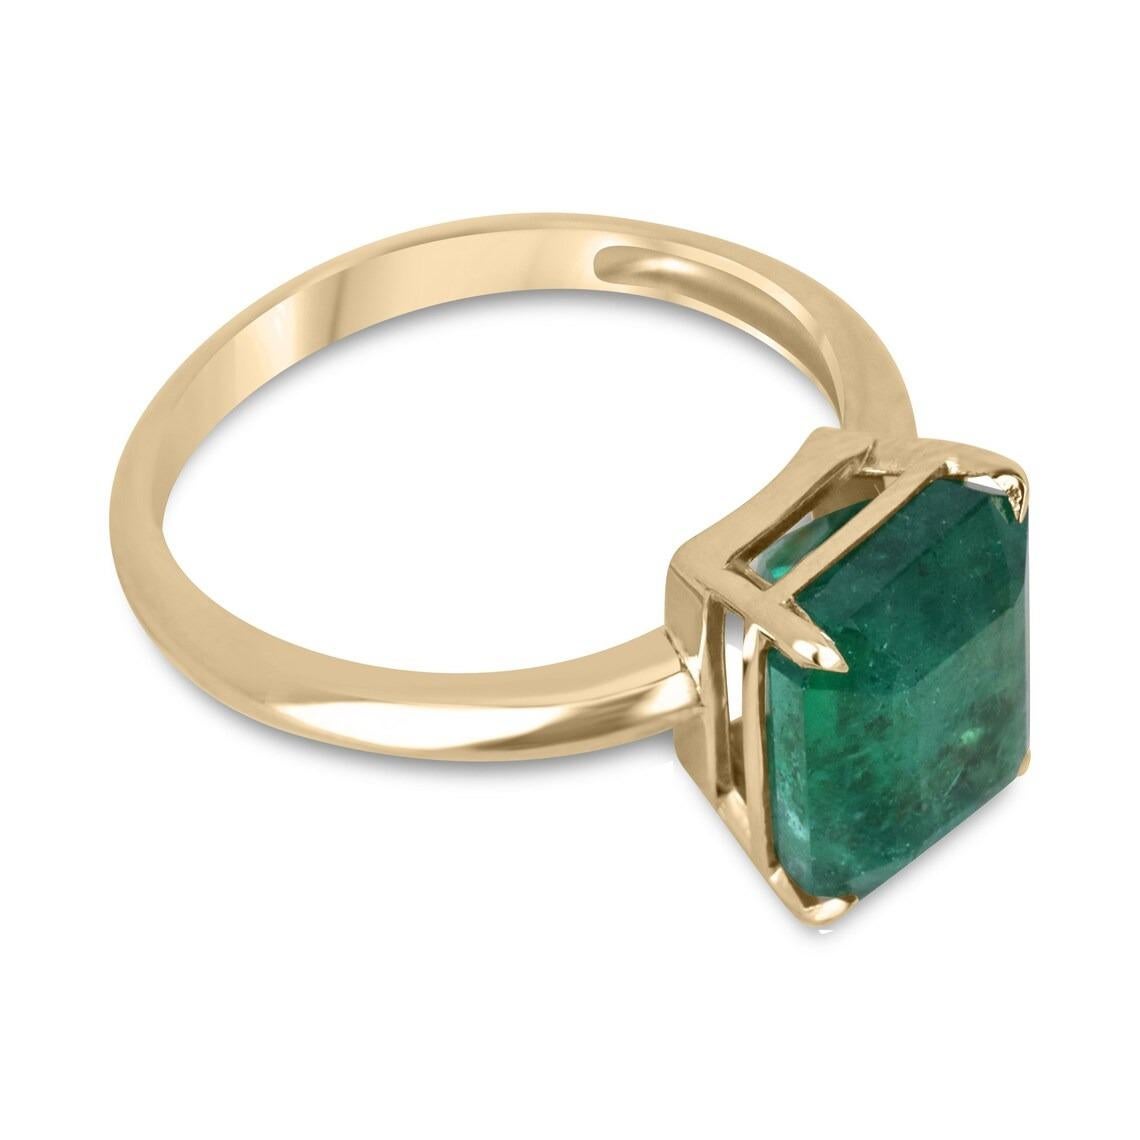 This ring is not for the faint of heart! Displayed is a deep green emerald solitaire emerald-cut engagement ring in .fine 14K yellow gold. This gorgeous solitaire ring carries a full 4.08-carat emerald in a four-prong setting. The emerald has